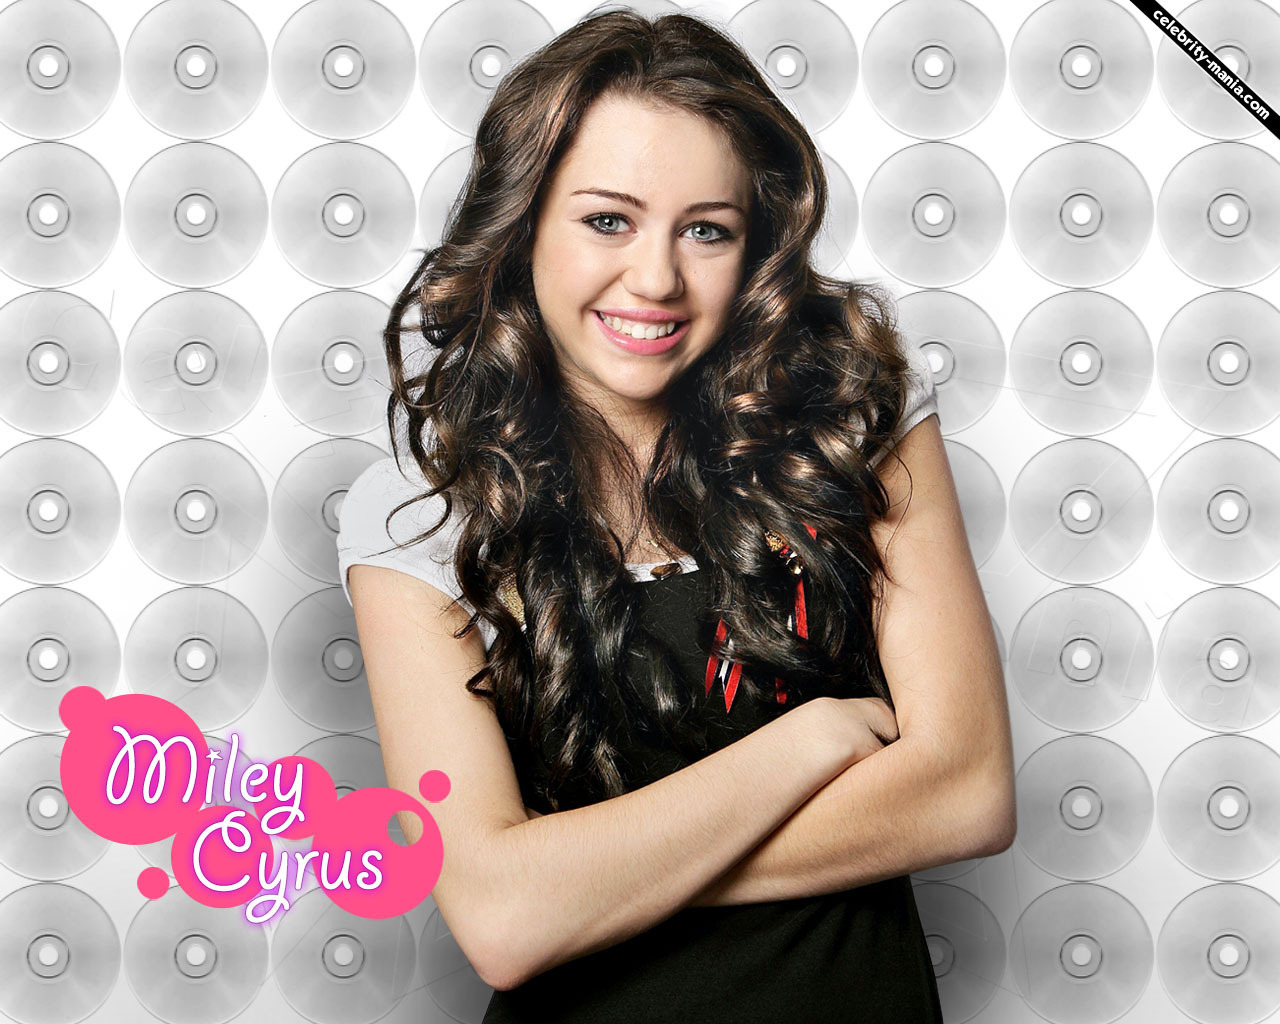 http://images2.fanpop.com/images/photos/3400000/Miley-Wallpapers-miley-cyrus-3452020-1280-1024.jpg